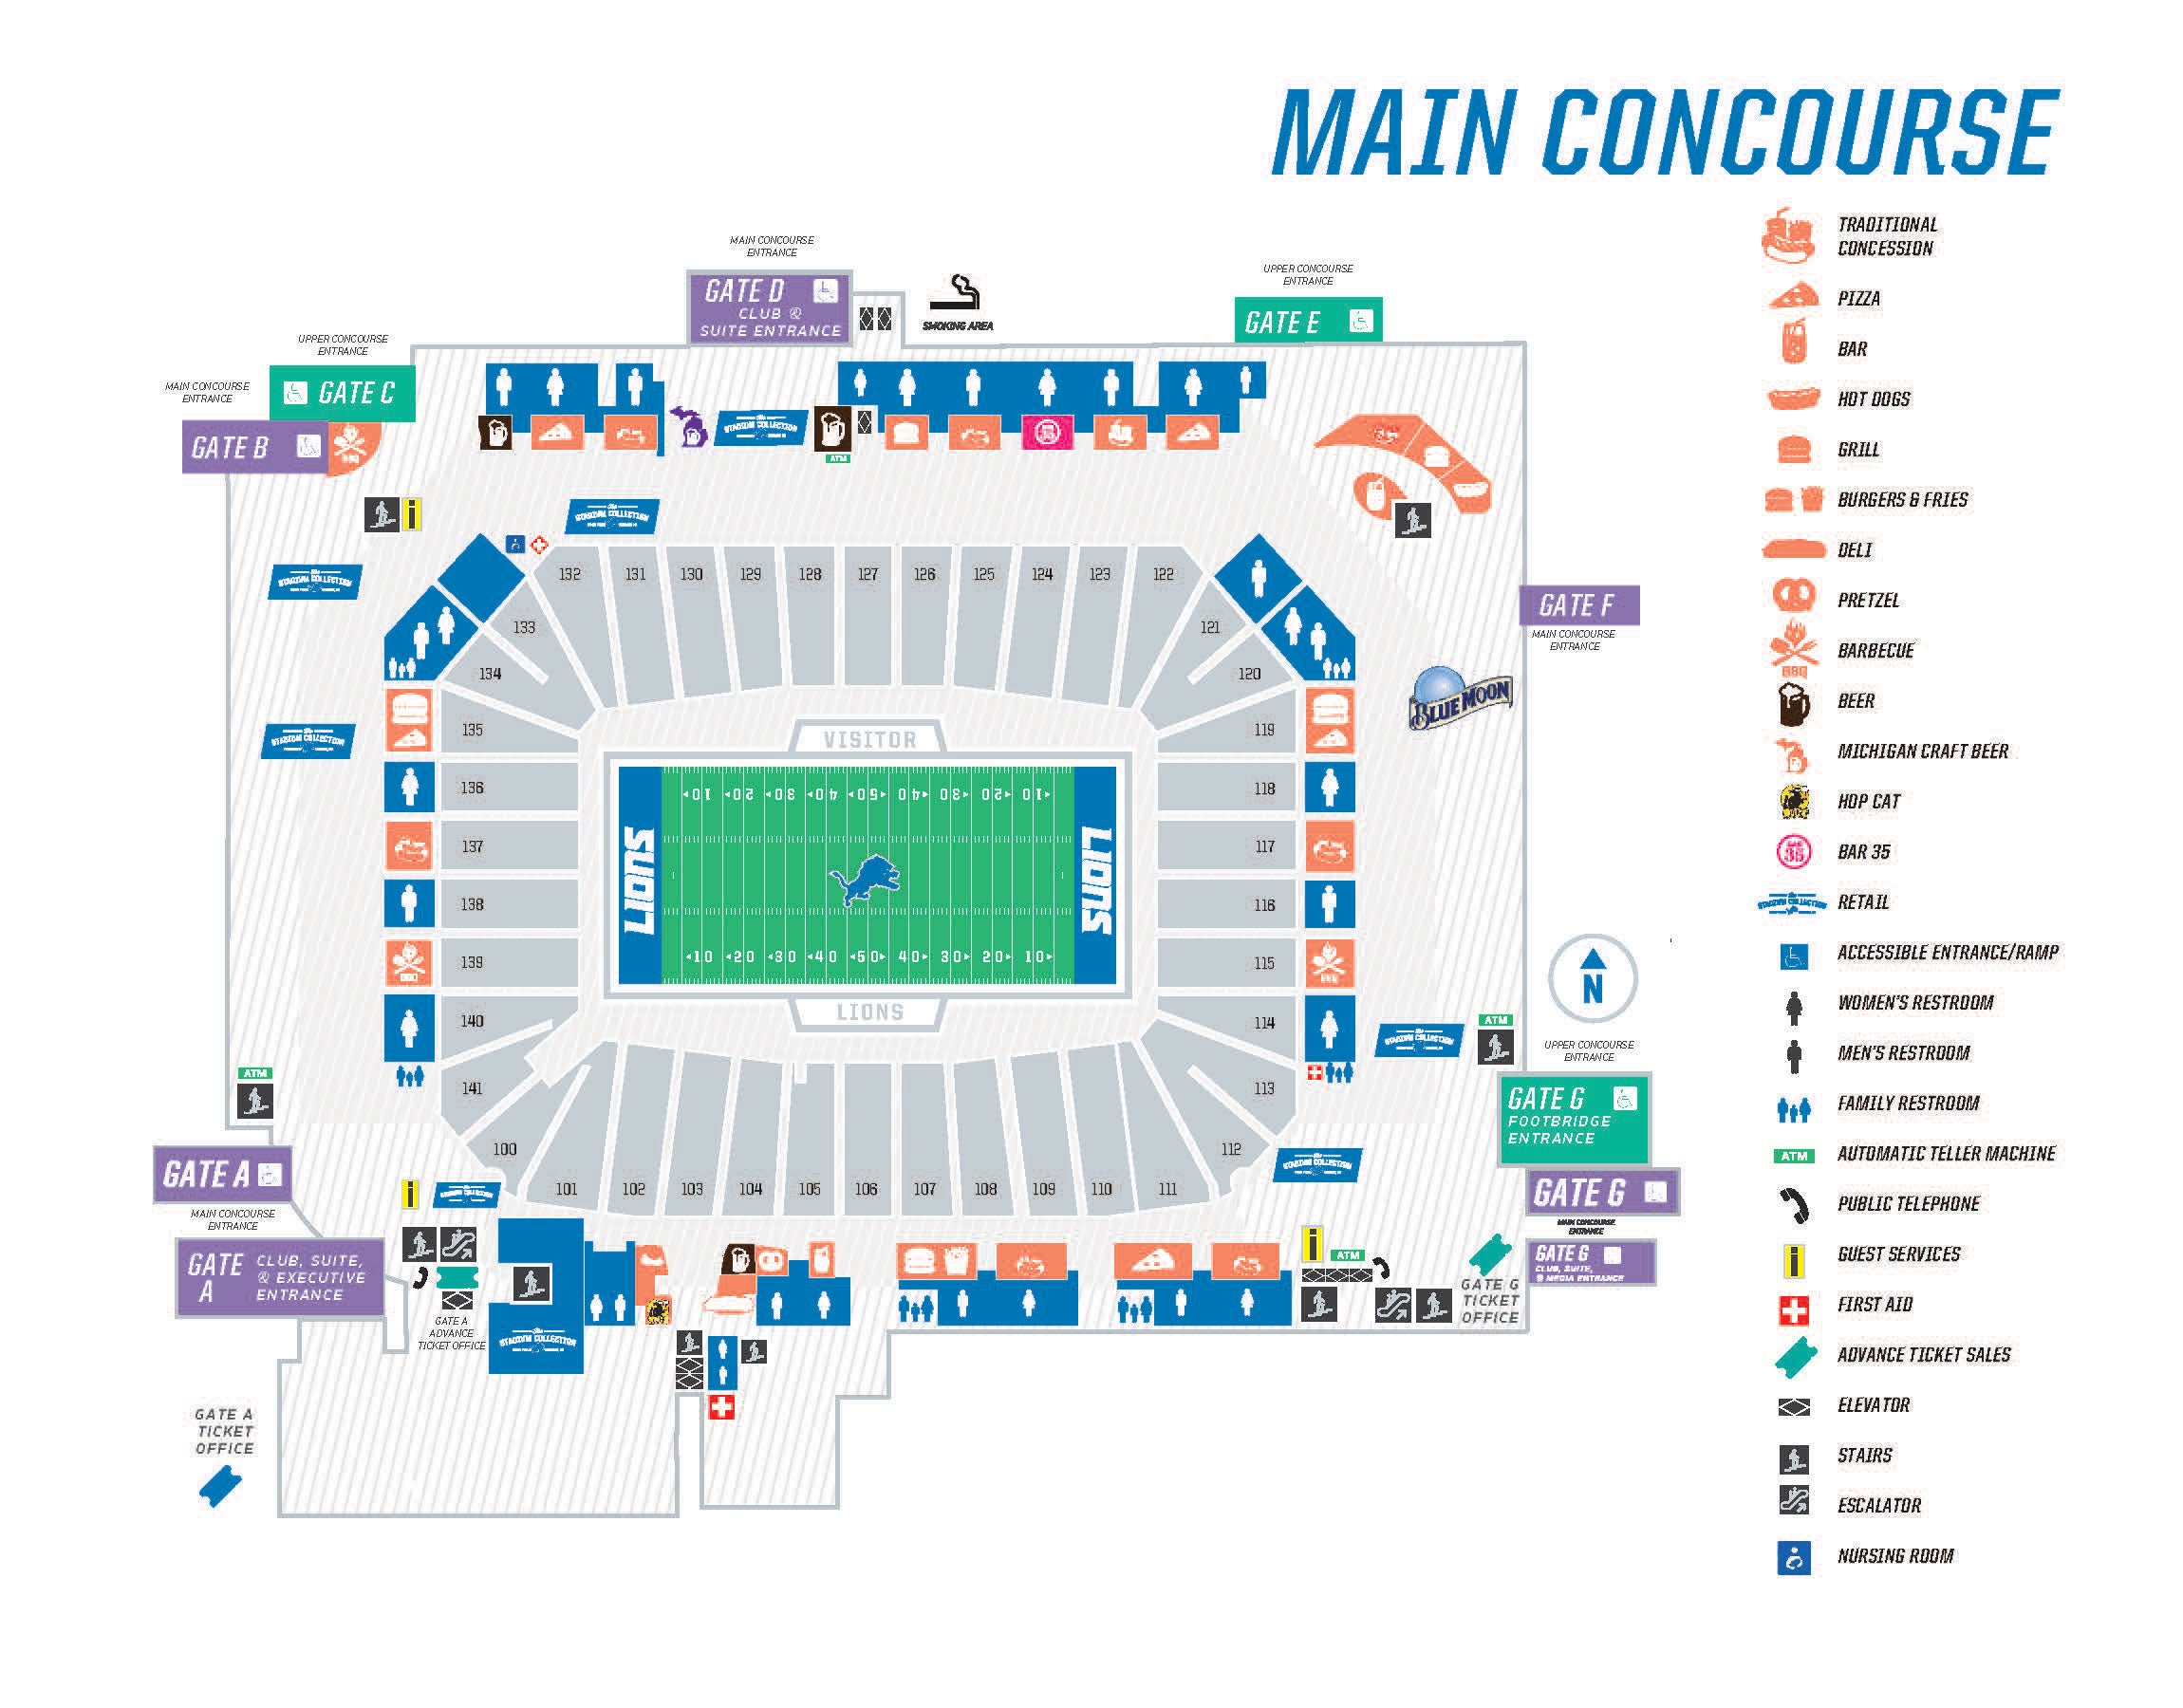 Ford Field Seating Chart Concert